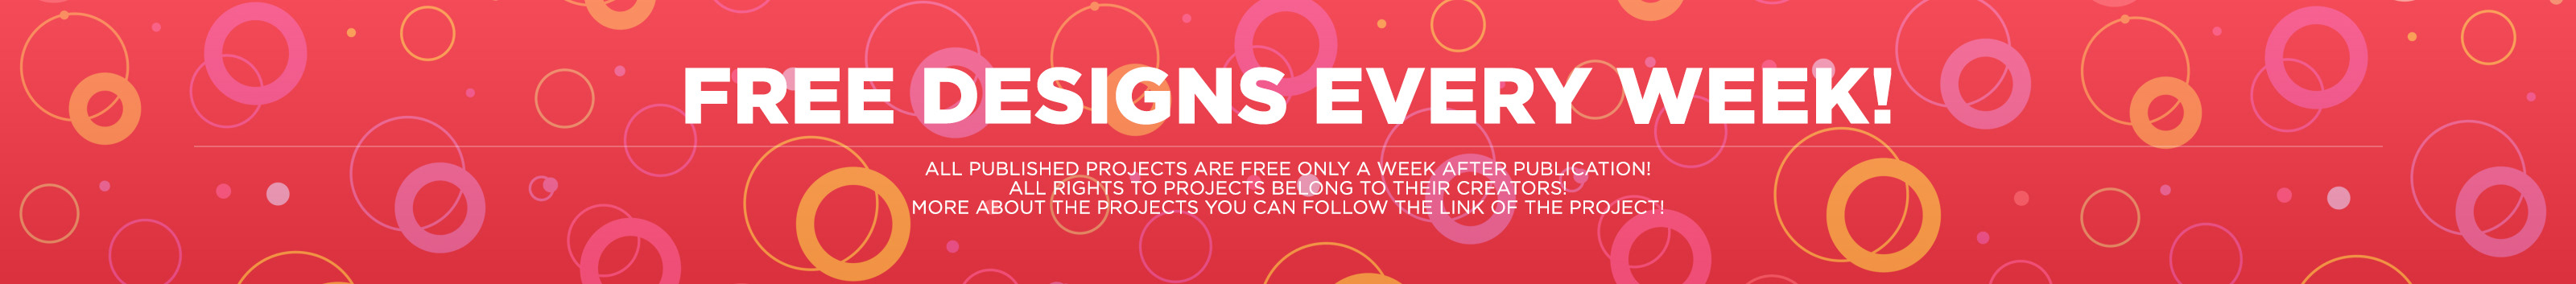 Free Designs Every Week!'s profile banner